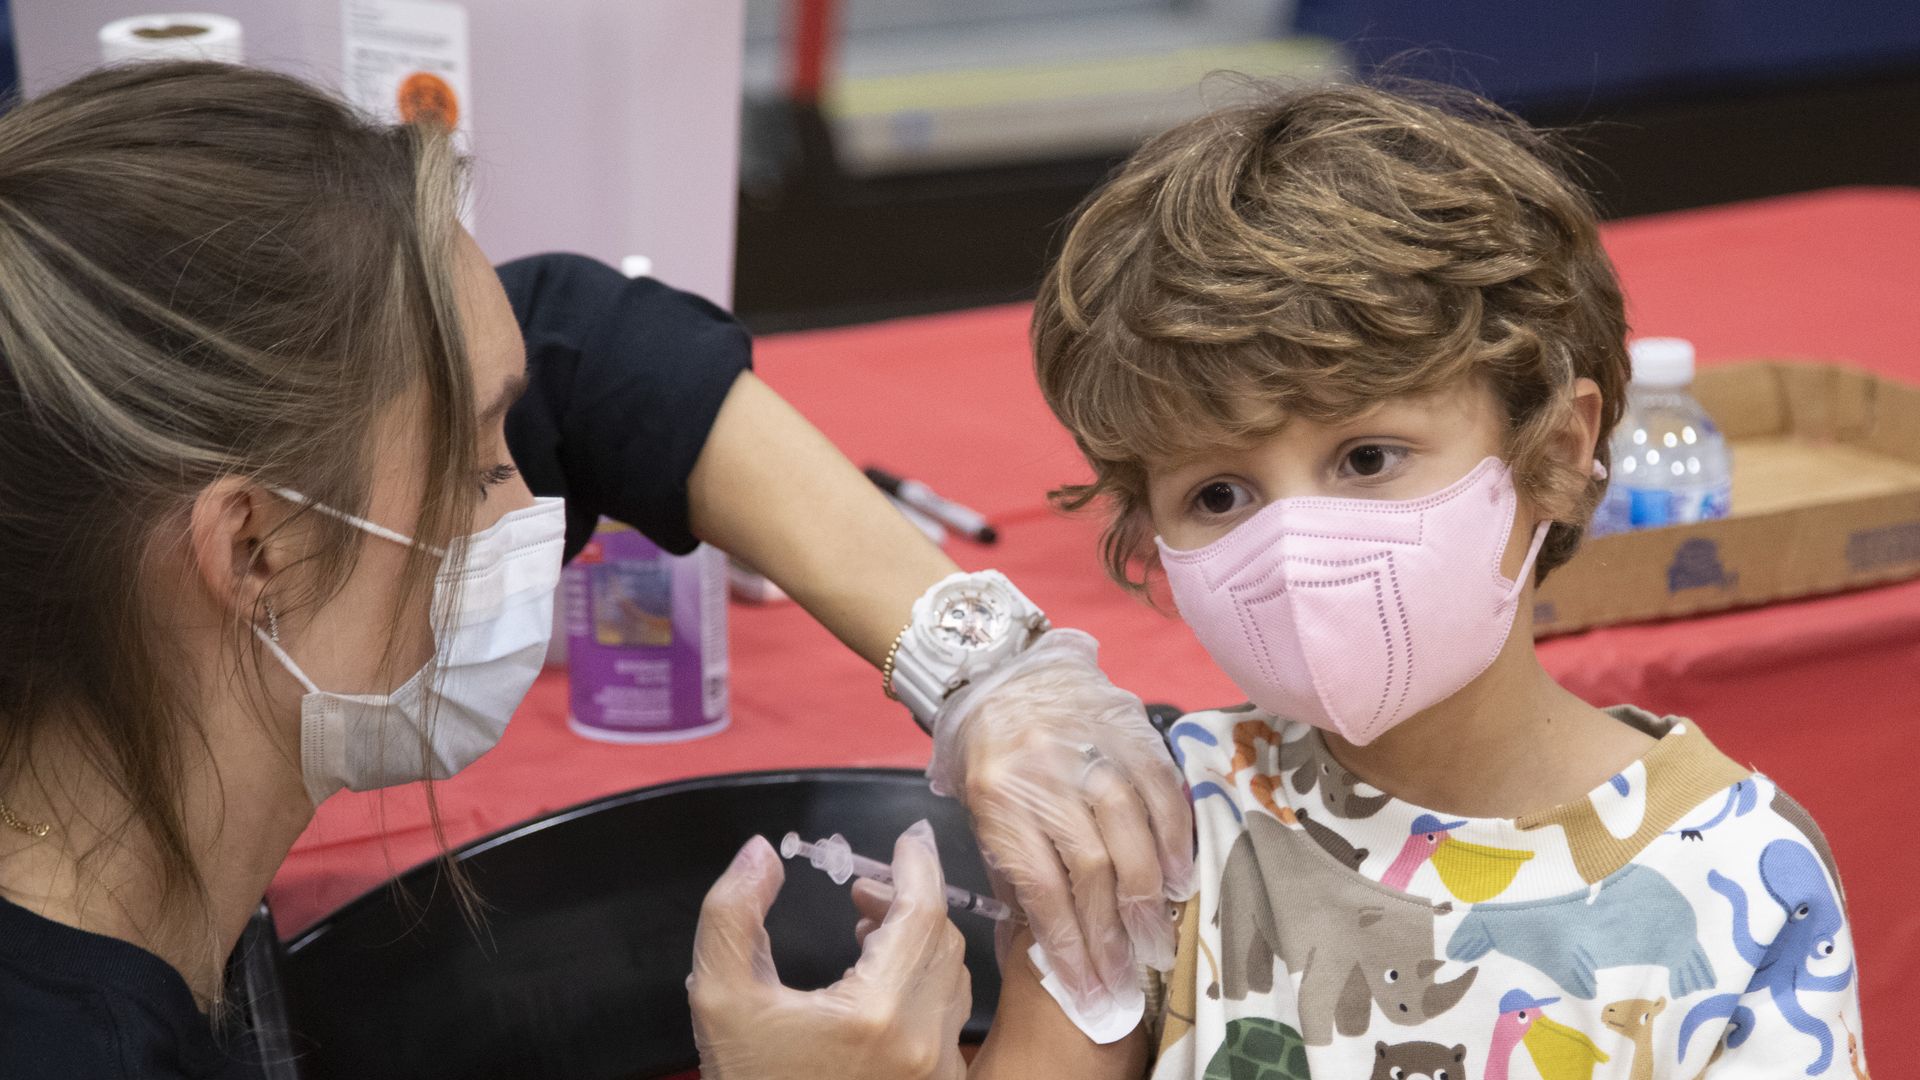 A 6-year-old child with a pink mask getting vaccinated